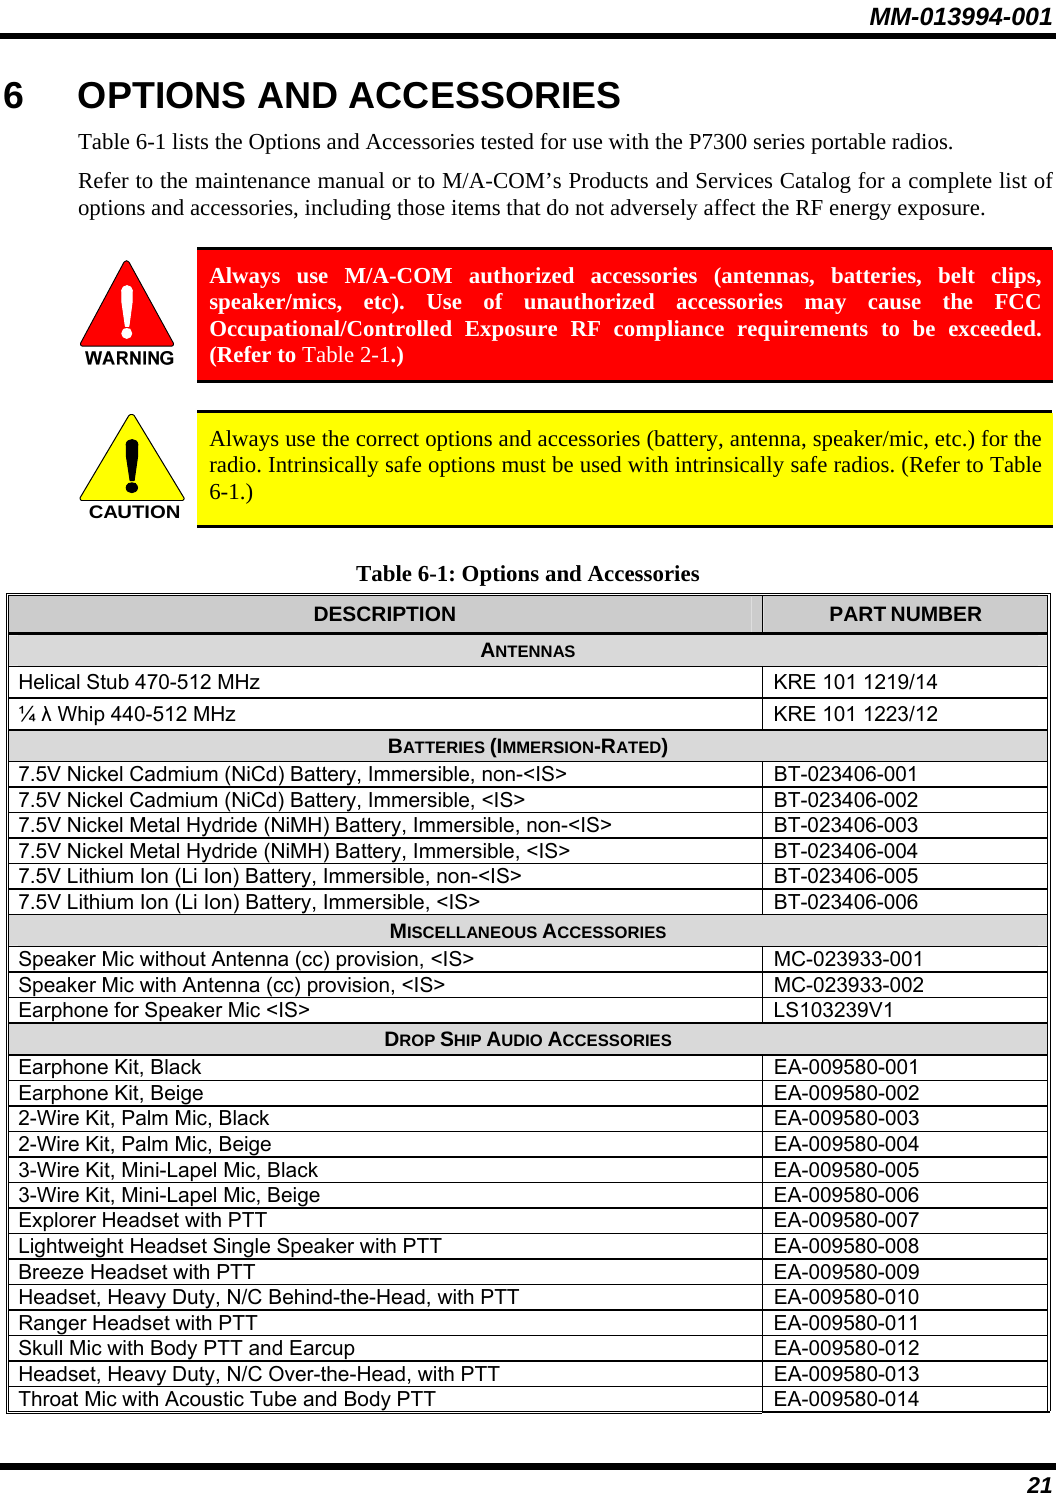 MM-013994-001 21 6  OPTIONS AND ACCESSORIES Table 6-1 lists the Options and Accessories tested for use with the P7300 series portable radios.  Refer to the maintenance manual or to M/A-COM’s Products and Services Catalog for a complete list of options and accessories, including those items that do not adversely affect the RF energy exposure.   Always use M/A-COM authorized accessories (antennas, batteries, belt clips, speaker/mics, etc). Use of unauthorized accessories may cause the FCC Occupational/Controlled Exposure RF compliance requirements to be exceeded. (Refer to Table 2-1.)  CAUTION Always use the correct options and accessories (battery, antenna, speaker/mic, etc.) for the radio. Intrinsically safe options must be used with intrinsically safe radios. (Refer to Table 6-1.)  Table 6-1: Options and Accessories DESCRIPTION  PART NUMBER ANTENNAS Helical Stub 470-512 MHz  KRE 101 1219/14 ¼ λ Whip 440-512 MHz  KRE 101 1223/12 BATTERIES (IMMERSION-RATED) 7.5V Nickel Cadmium (NiCd) Battery, Immersible, non-&lt;IS&gt;  BT-023406-001 7.5V Nickel Cadmium (NiCd) Battery, Immersible, &lt;IS&gt;  BT-023406-002 7.5V Nickel Metal Hydride (NiMH) Battery, Immersible, non-&lt;IS&gt;  BT-023406-003 7.5V Nickel Metal Hydride (NiMH) Battery, Immersible, &lt;IS&gt;  BT-023406-004 7.5V Lithium Ion (Li Ion) Battery, Immersible, non-&lt;IS&gt;  BT-023406-005 7.5V Lithium Ion (Li Ion) Battery, Immersible, &lt;IS&gt;  BT-023406-006 MISCELLANEOUS ACCESSORIES Speaker Mic without Antenna (cc) provision, &lt;IS&gt;  MC-023933-001 Speaker Mic with Antenna (cc) provision, &lt;IS&gt;  MC-023933-002 Earphone for Speaker Mic &lt;IS&gt;  LS103239V1 DROP SHIP AUDIO ACCESSORIES Earphone Kit, Black  EA-009580-001 Earphone Kit, Beige  EA-009580-002 2-Wire Kit, Palm Mic, Black  EA-009580-003 2-Wire Kit, Palm Mic, Beige  EA-009580-004 3-Wire Kit, Mini-Lapel Mic, Black  EA-009580-005 3-Wire Kit, Mini-Lapel Mic, Beige  EA-009580-006 Explorer Headset with PTT  EA-009580-007 Lightweight Headset Single Speaker with PTT  EA-009580-008 Breeze Headset with PTT  EA-009580-009 Headset, Heavy Duty, N/C Behind-the-Head, with PTT  EA-009580-010 Ranger Headset with PTT  EA-009580-011 Skull Mic with Body PTT and Earcup  EA-009580-012 Headset, Heavy Duty, N/C Over-the-Head, with PTT  EA-009580-013 Throat Mic with Acoustic Tube and Body PTT  EA-009580-014 